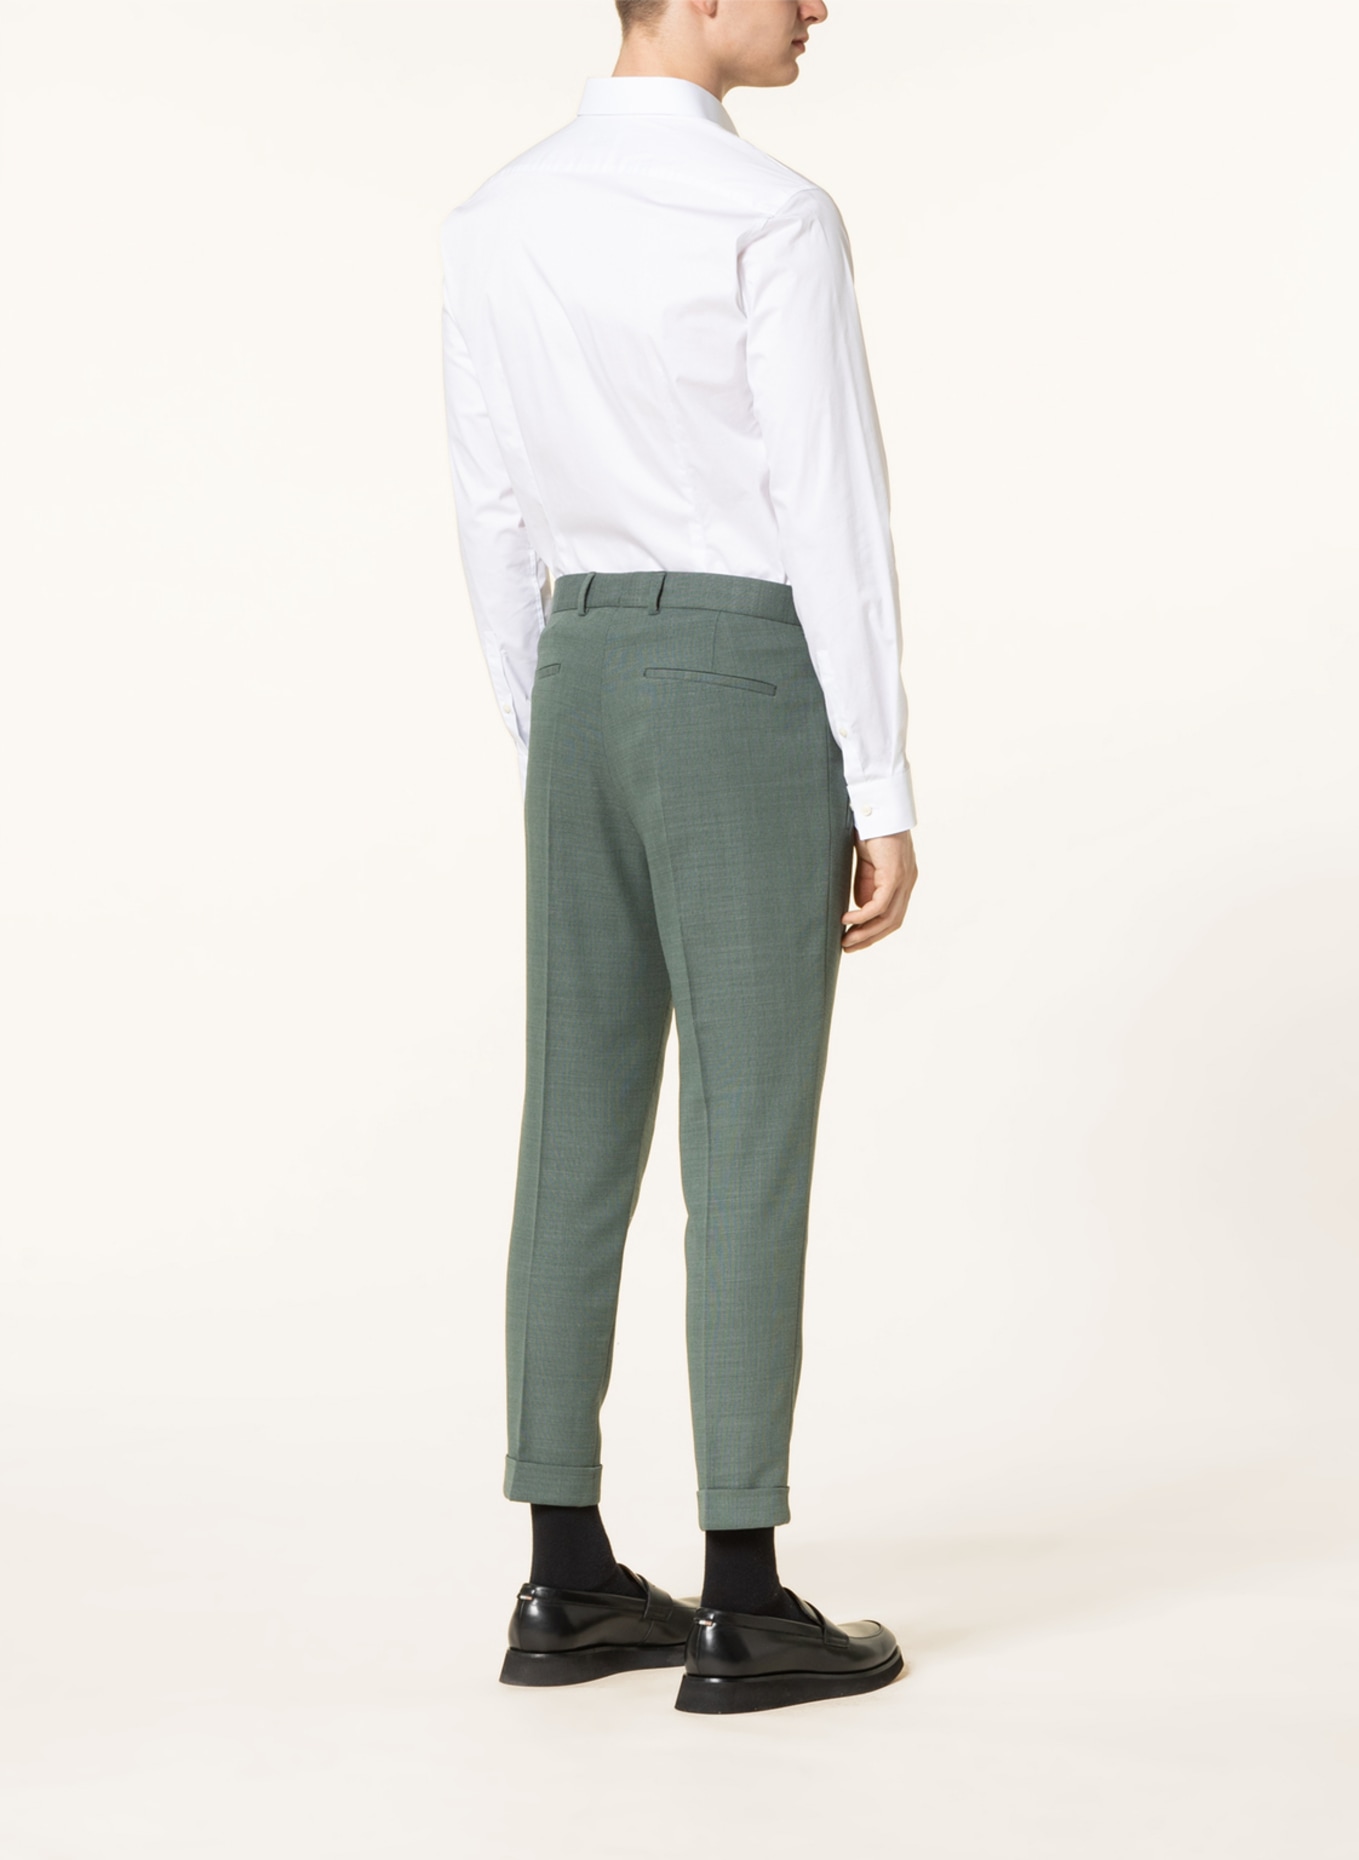 STRELLSON Suit pants LUIS relaxed fit, Color: 310 Medium Green               310 (Image 3)